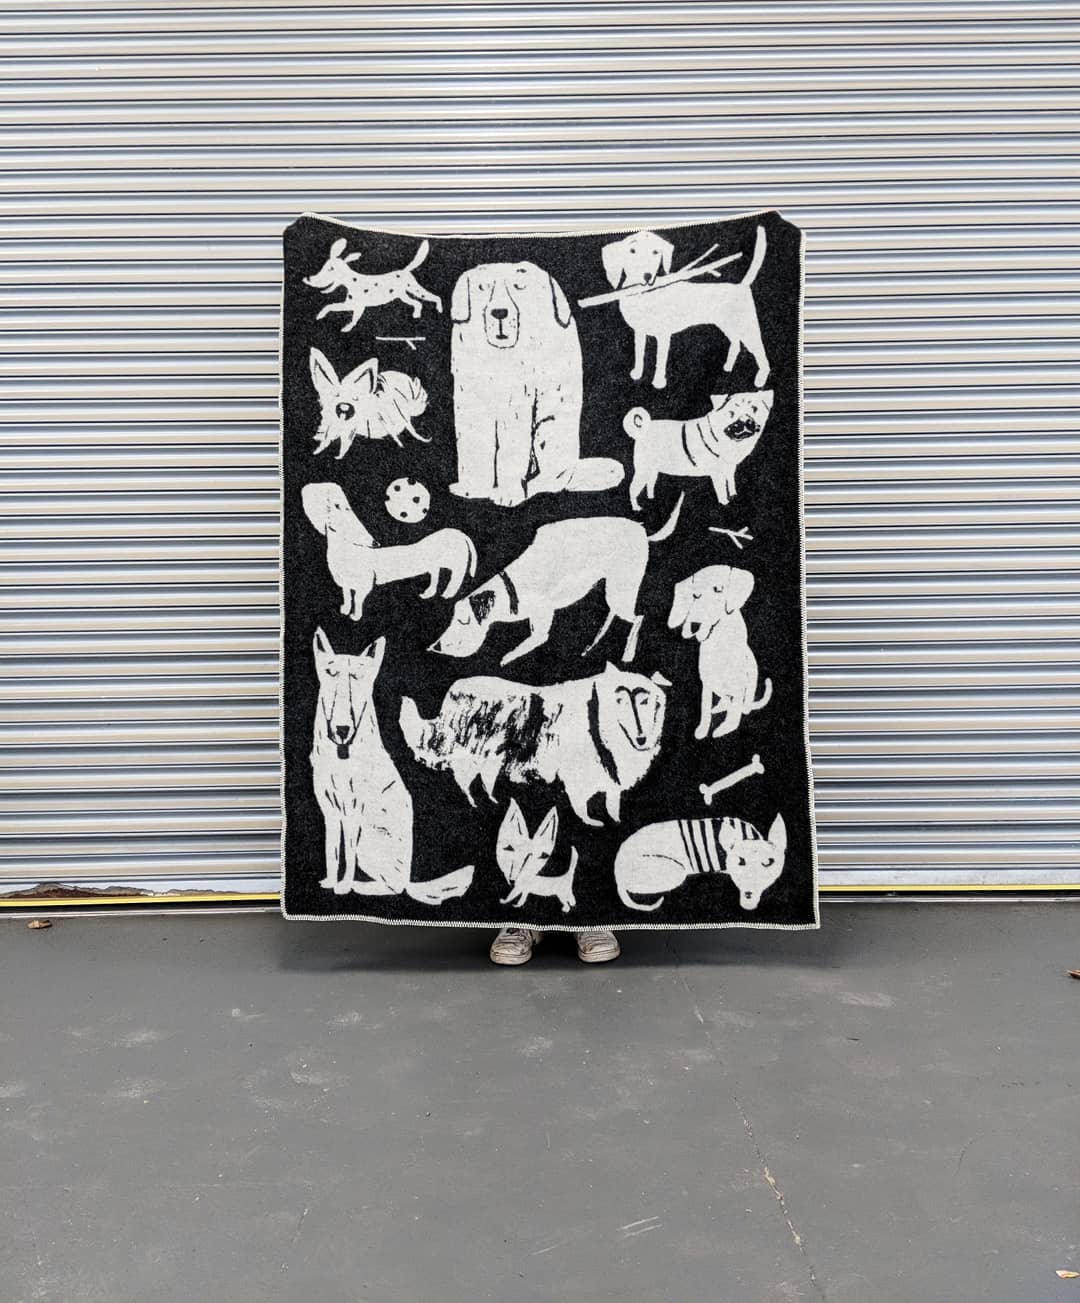 Dog Park Blanket from Four Legs / Four Walls